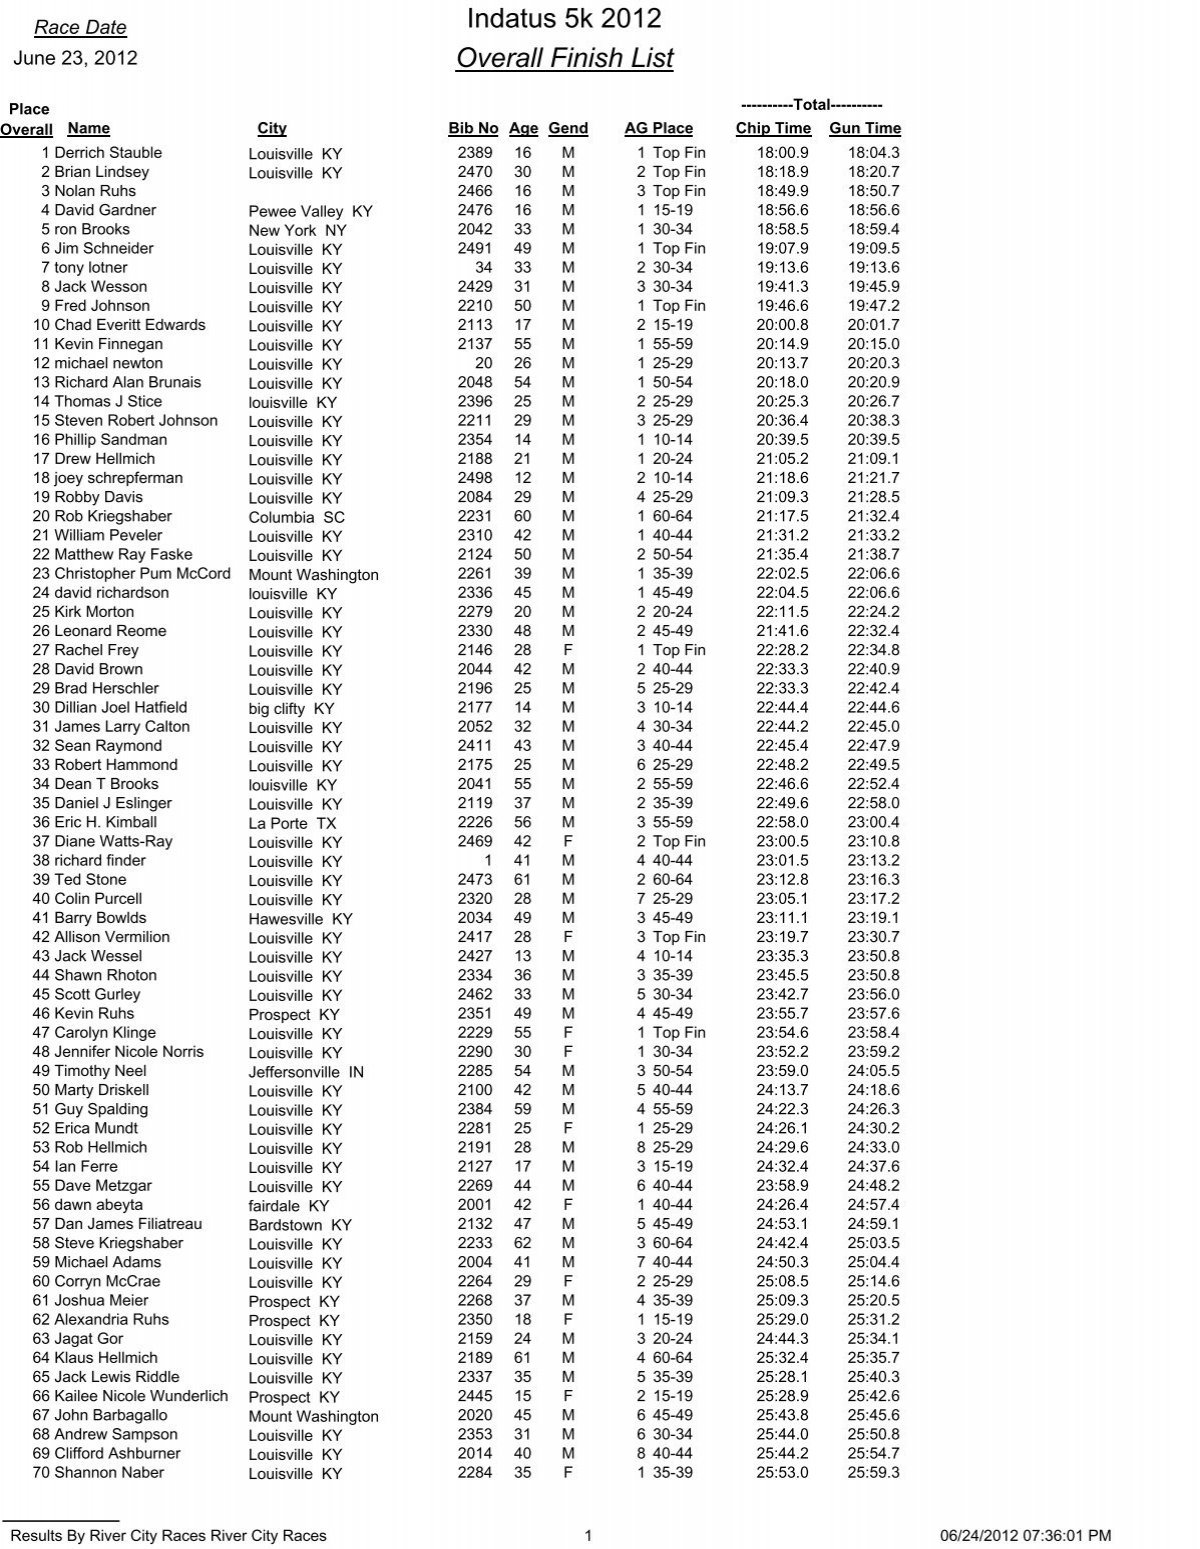 Indatus 5k 2012 Overall Finish List - River City Races